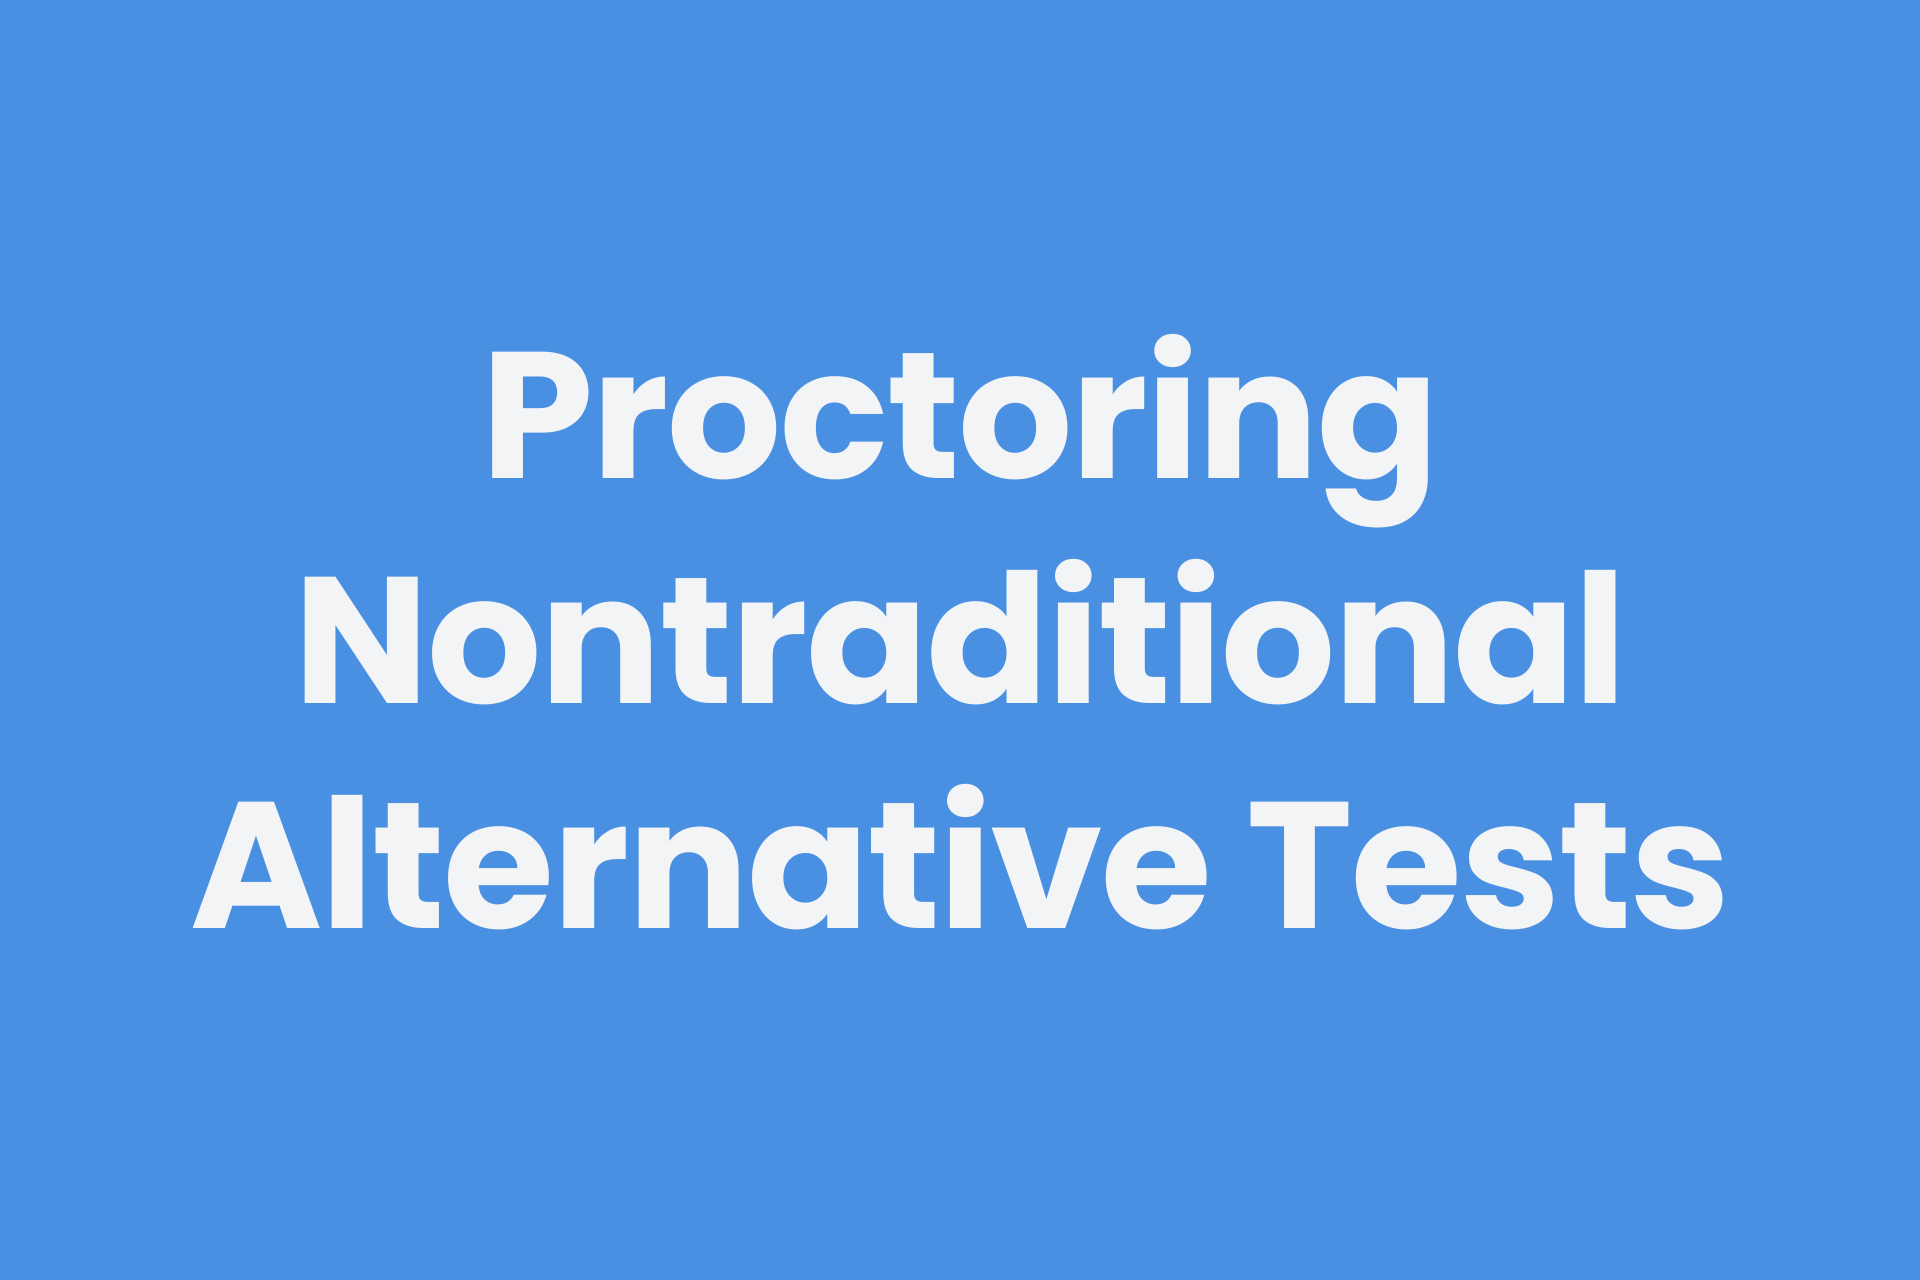 Tips for proctoring alternative assessment activities and nontraditional exams